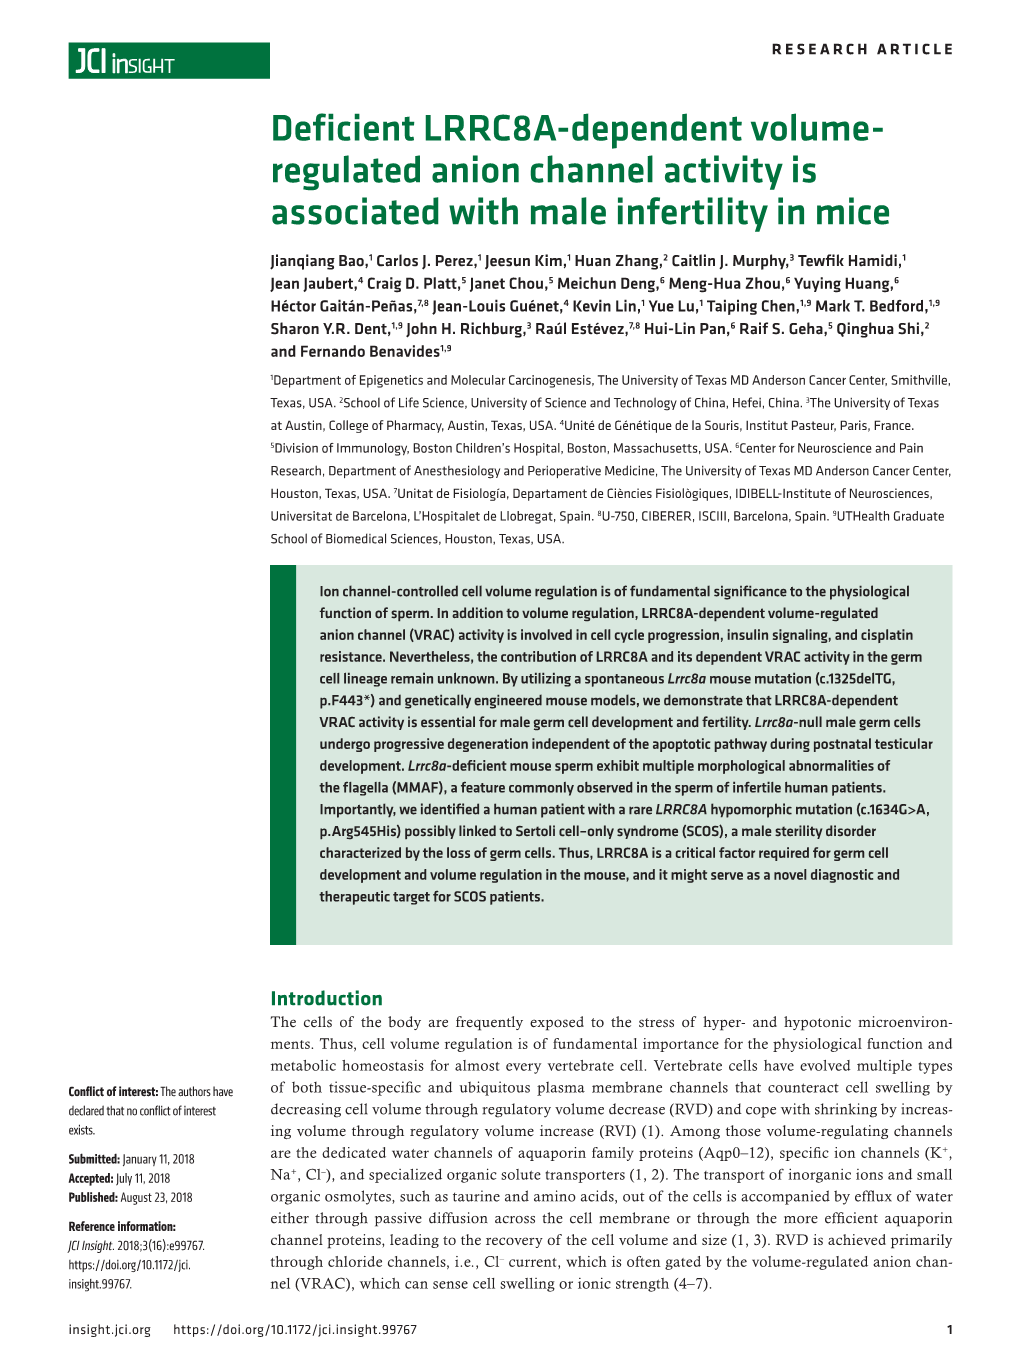 Regulated Anion Channel Activity Is Associated with Male Infertility in Mice